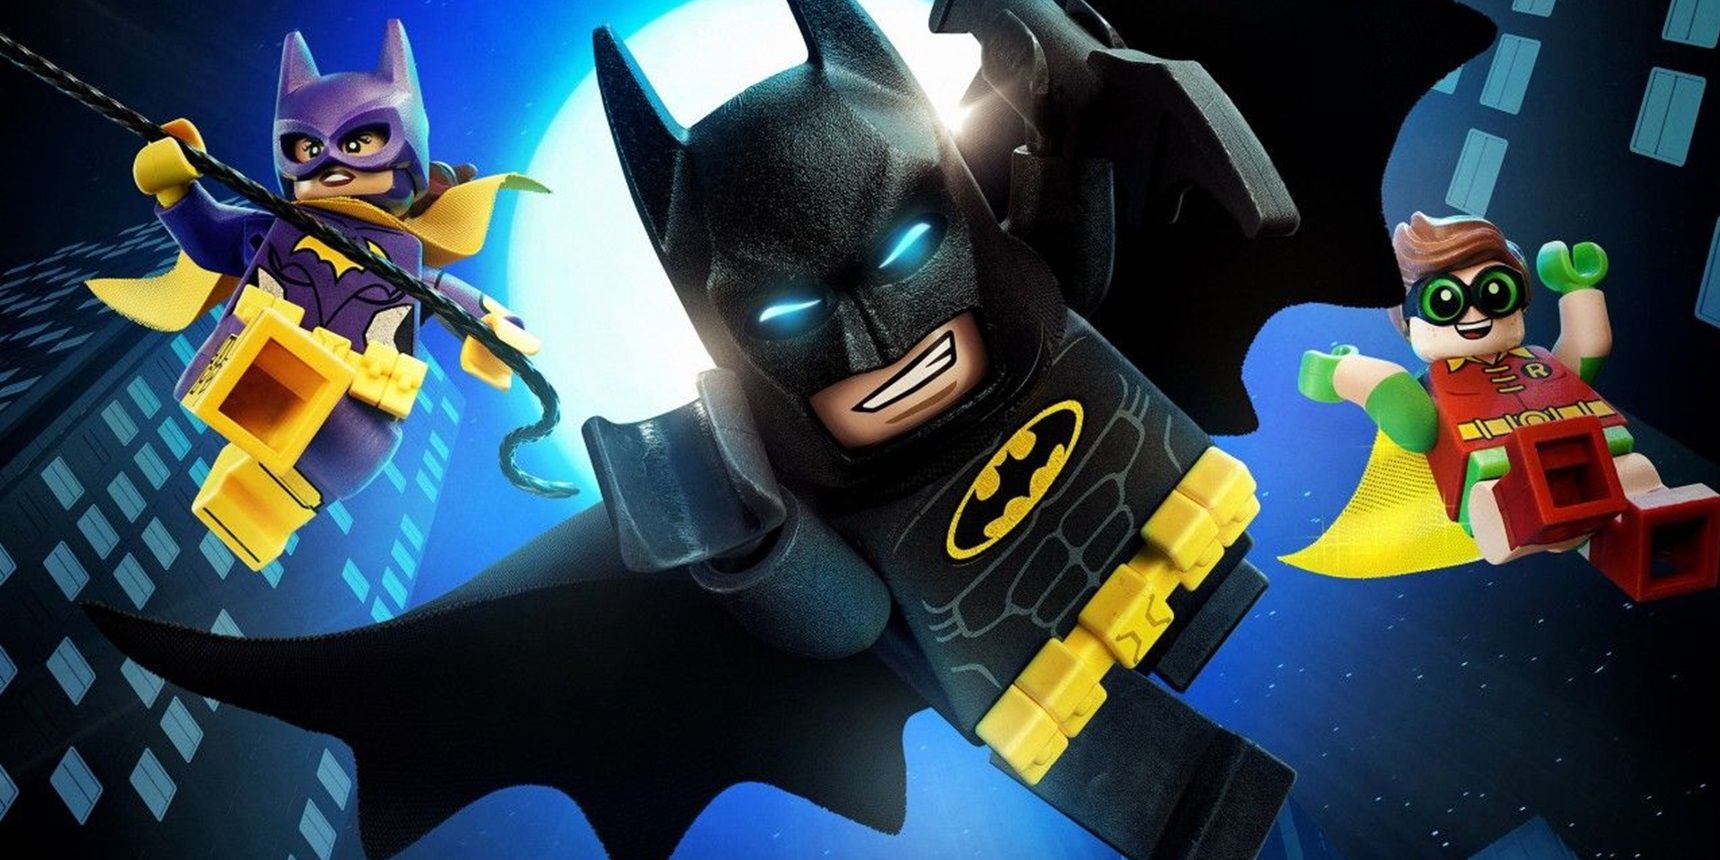 The poster for The Lego Batman Movie